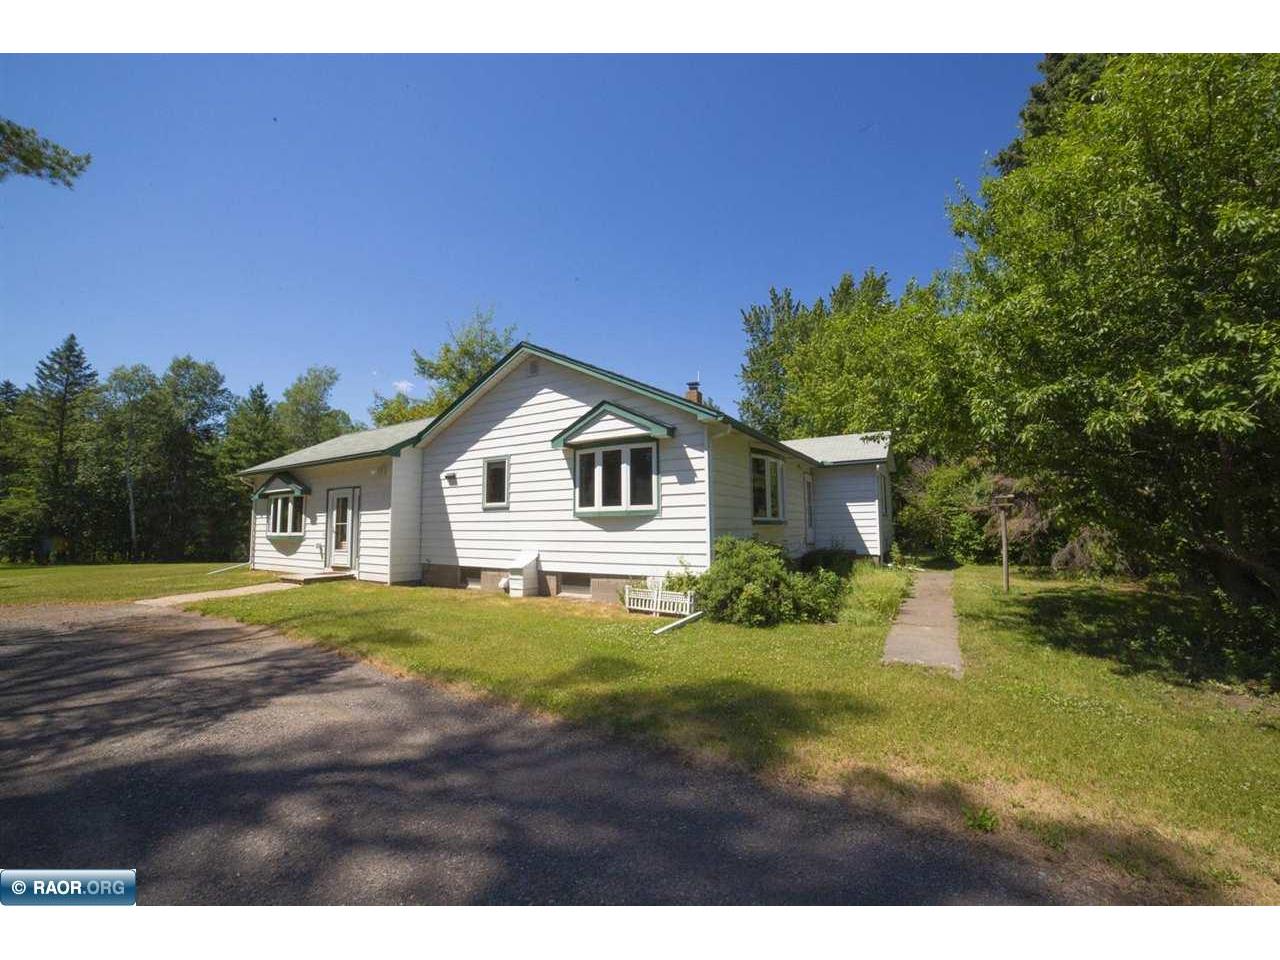 7255 Hwy 5 Floodwood MN 55736 - Whiteface 141786 image1